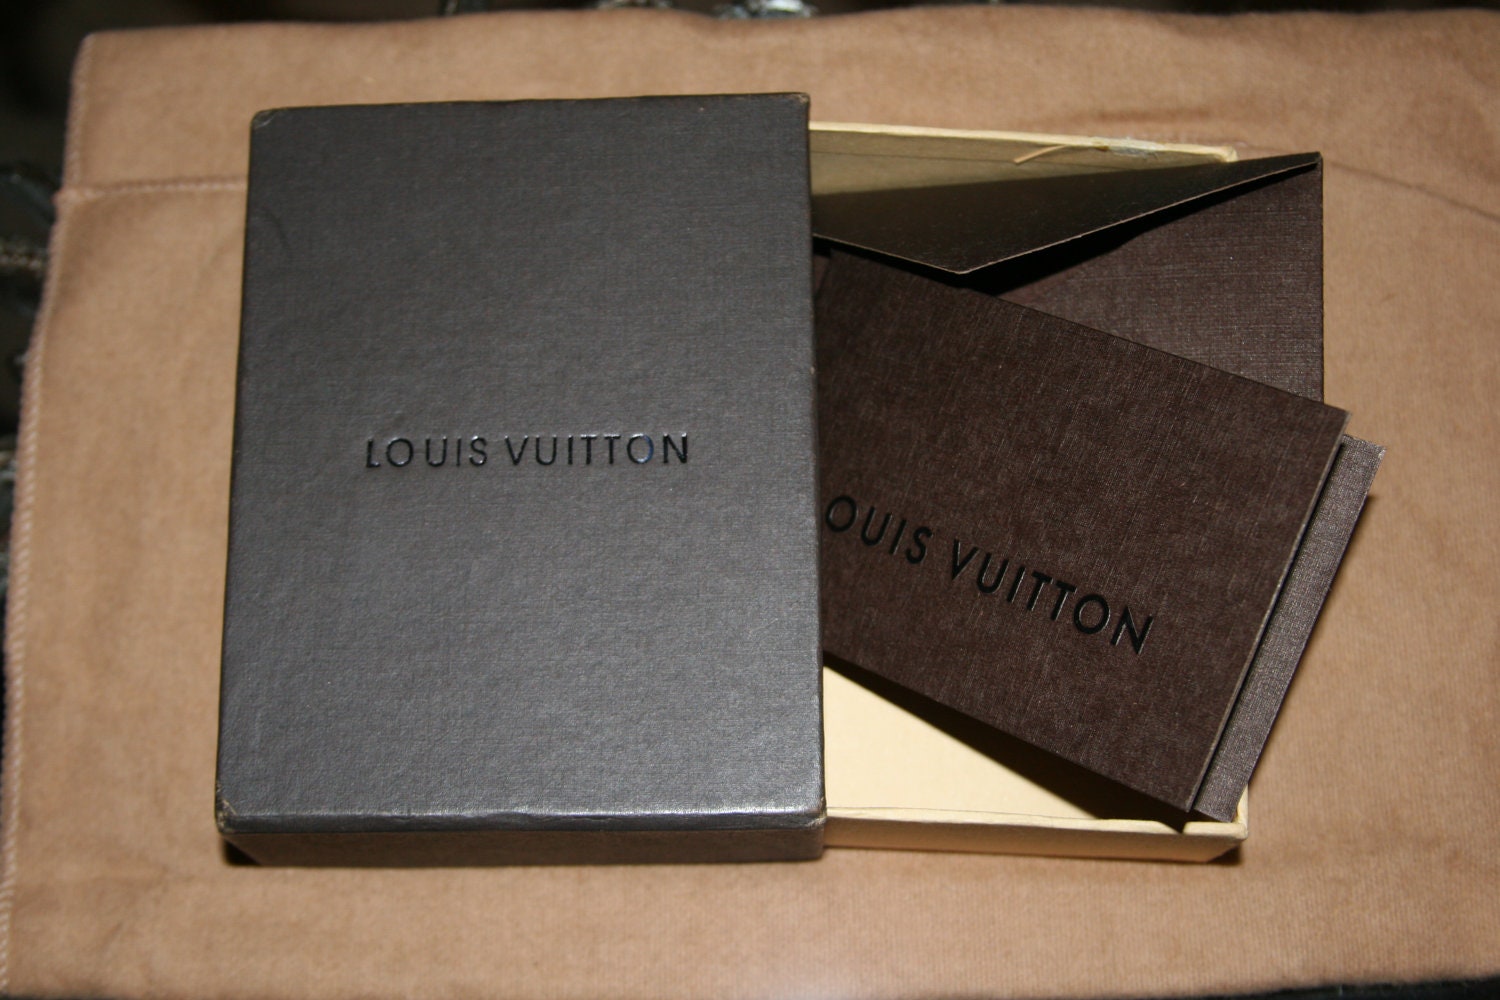 Louis Vuitton gift box with gift card and envelope